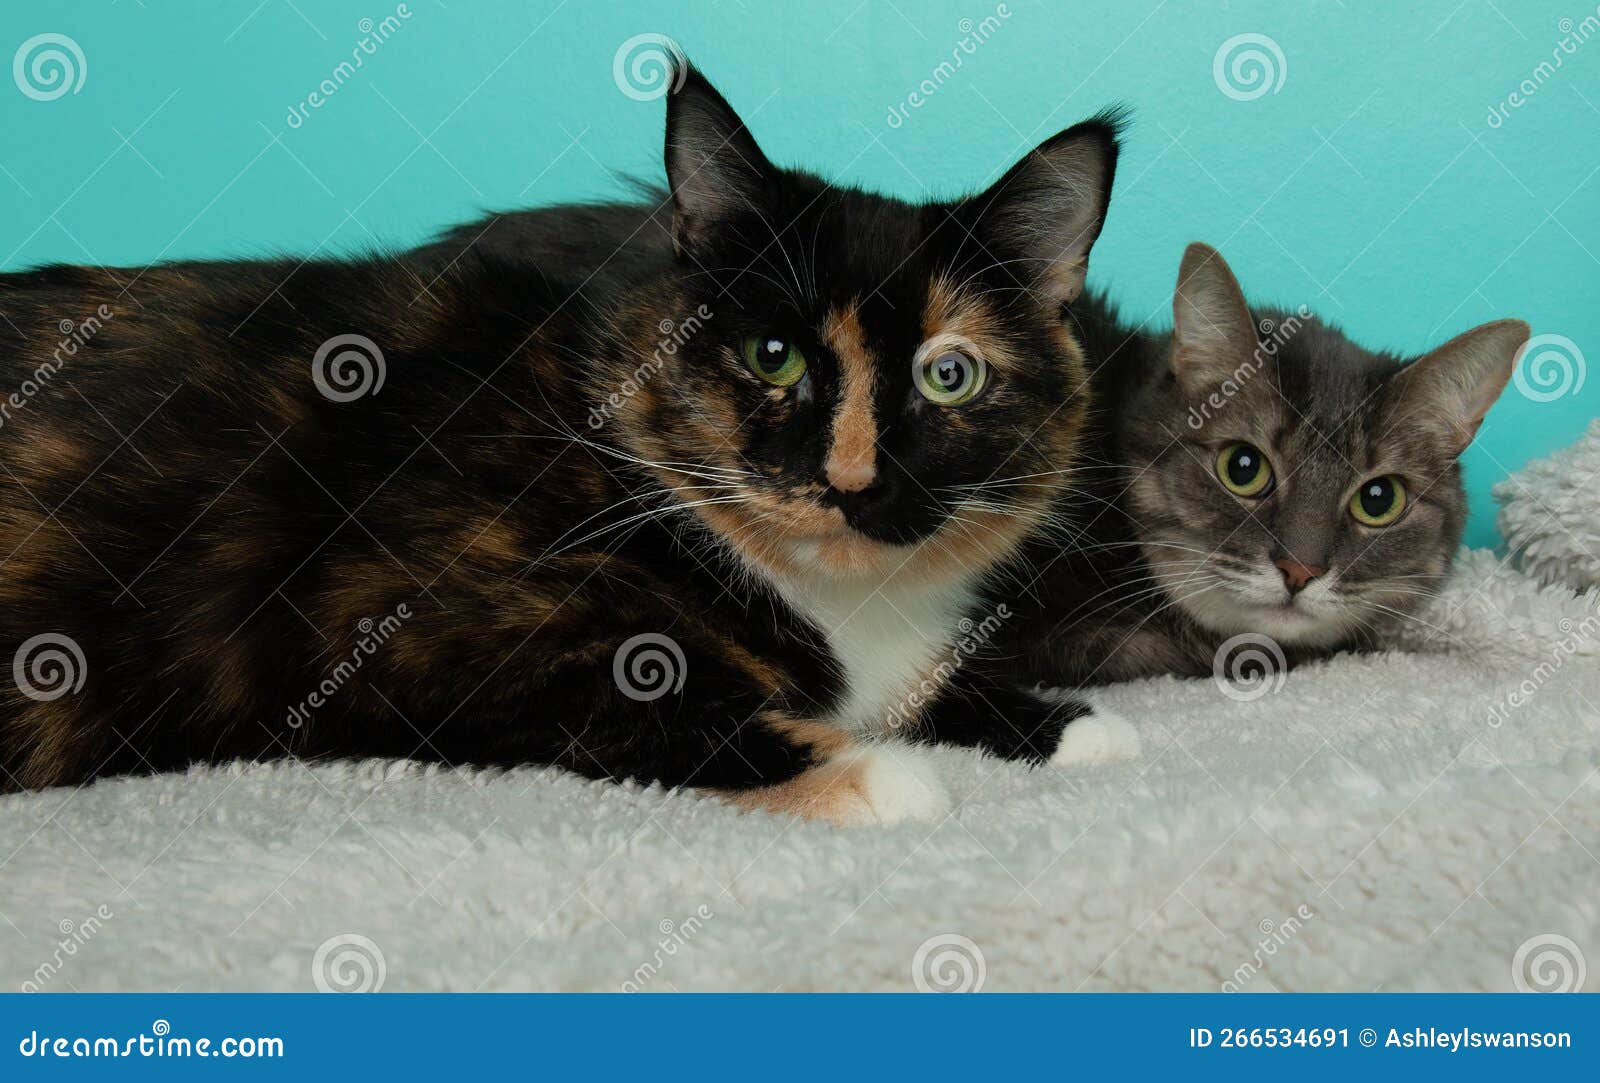 Two Cats Calico and Grey Tabby with Green Eyes Portrait Stock Image ...